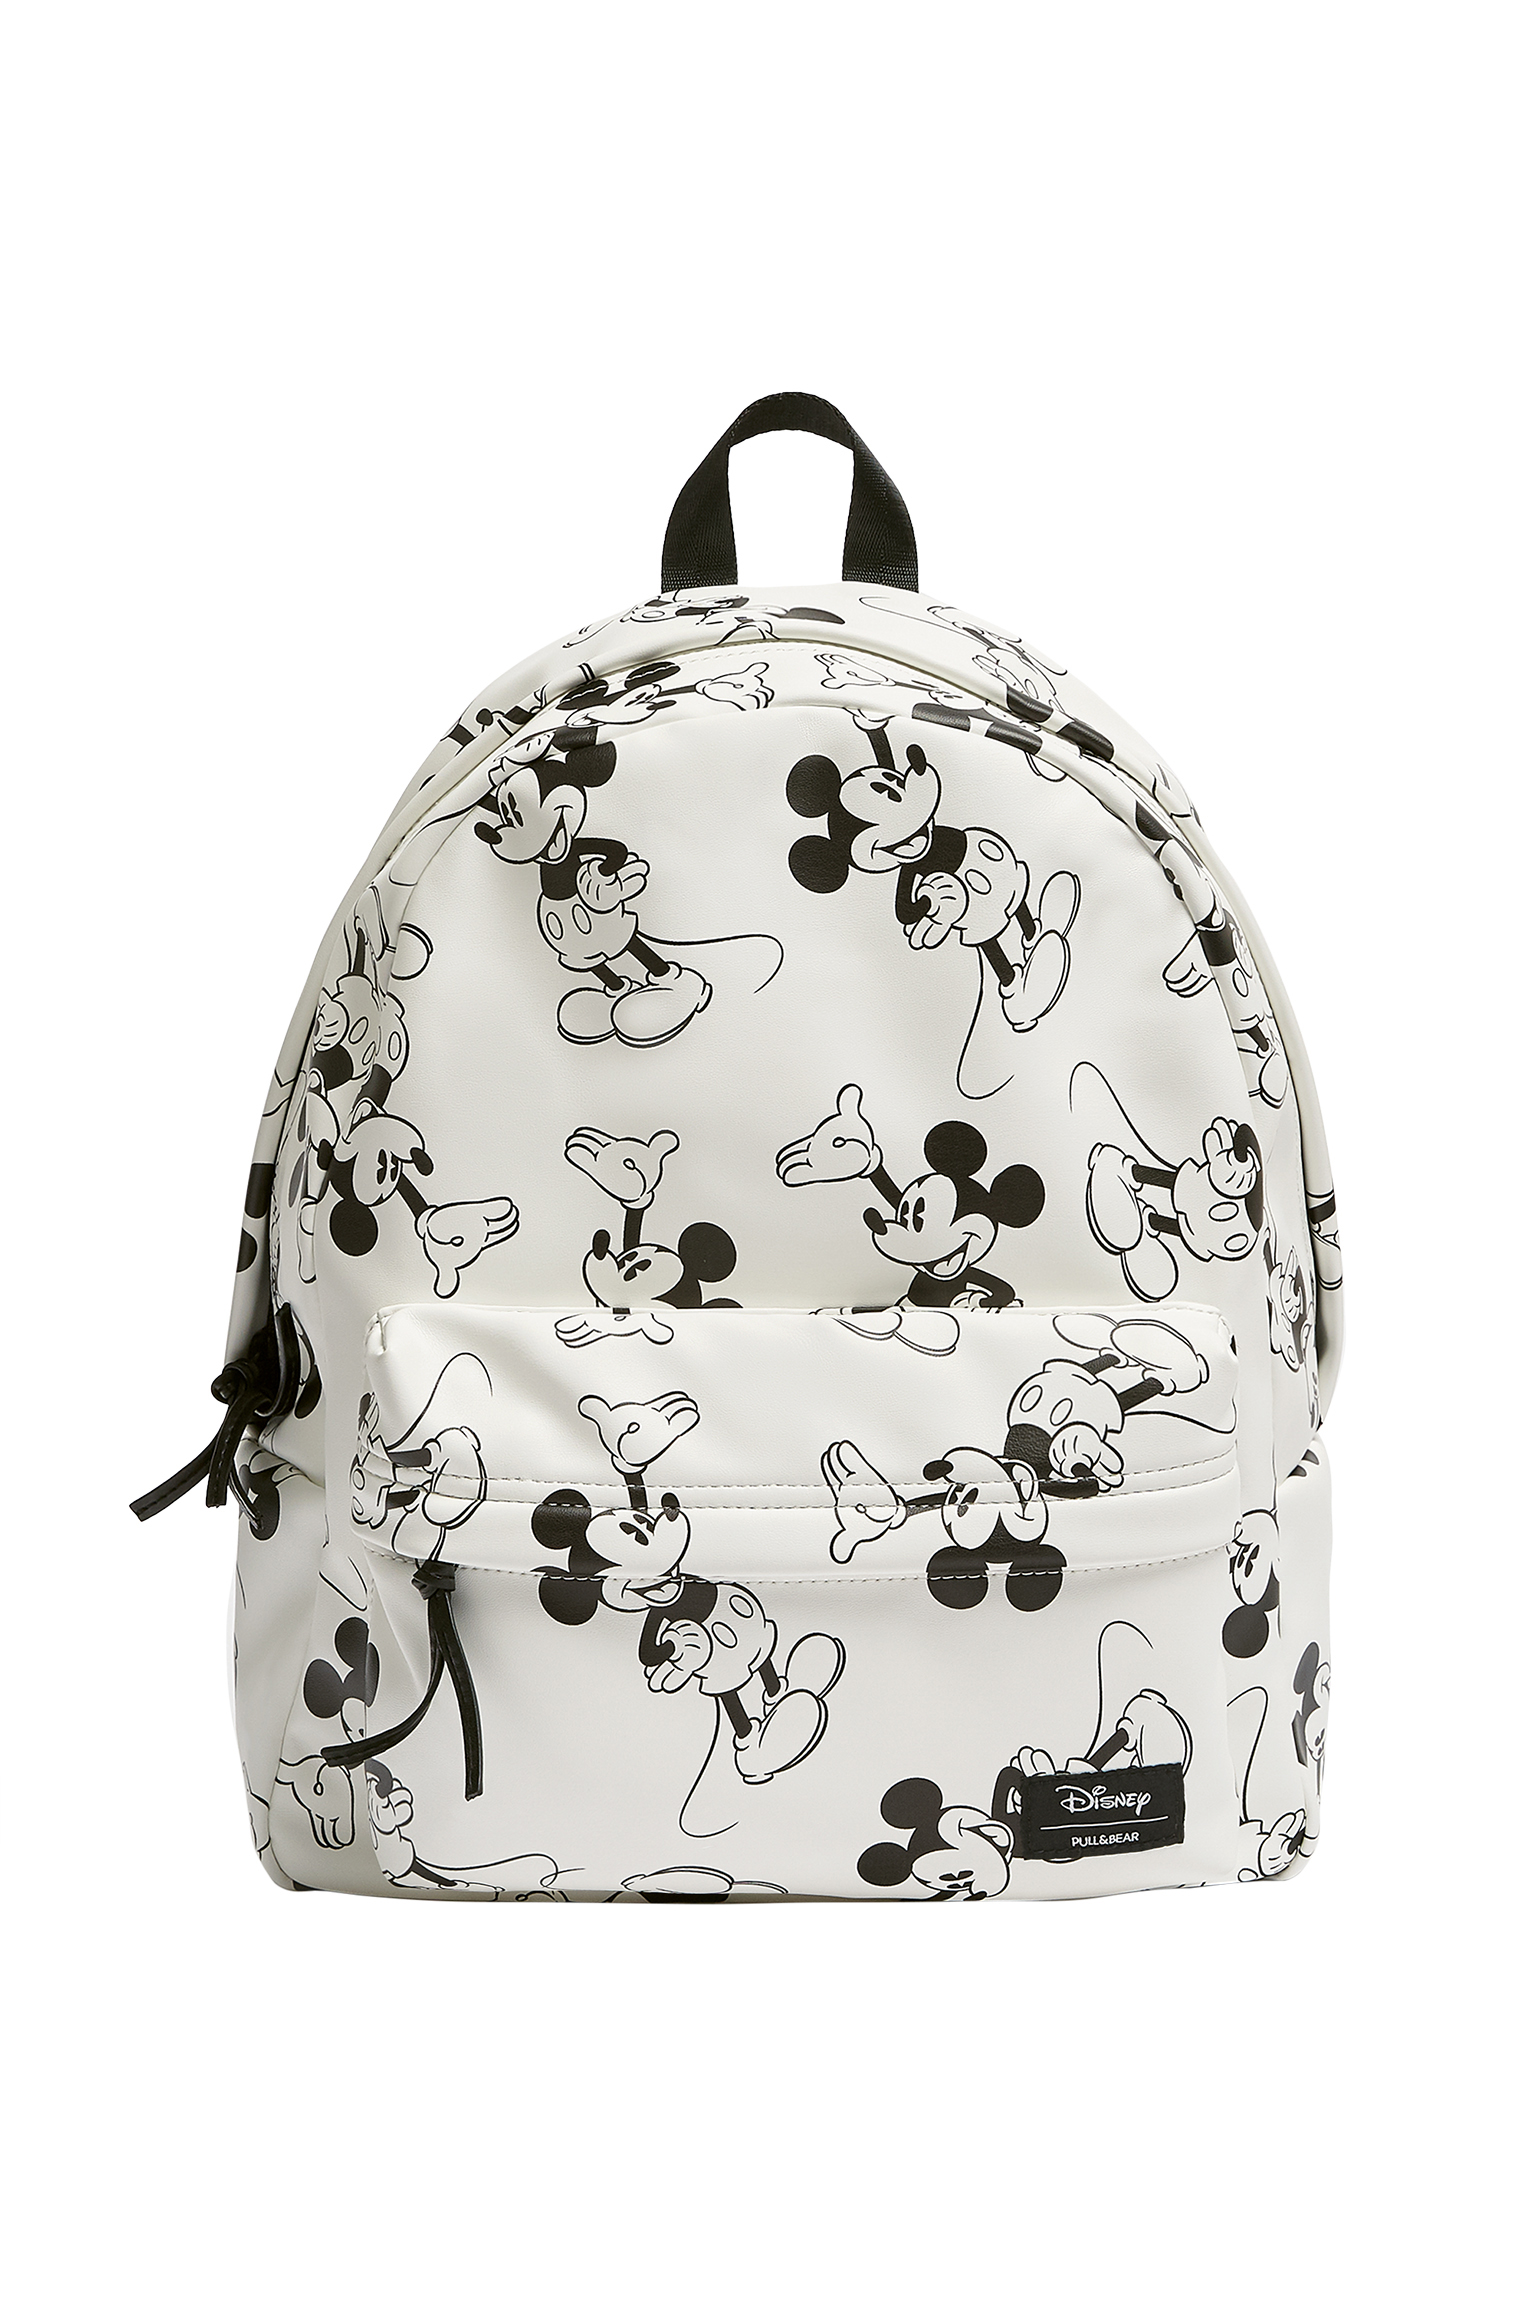 White Mickey Mouse backpack - PULL\u0026BEAR